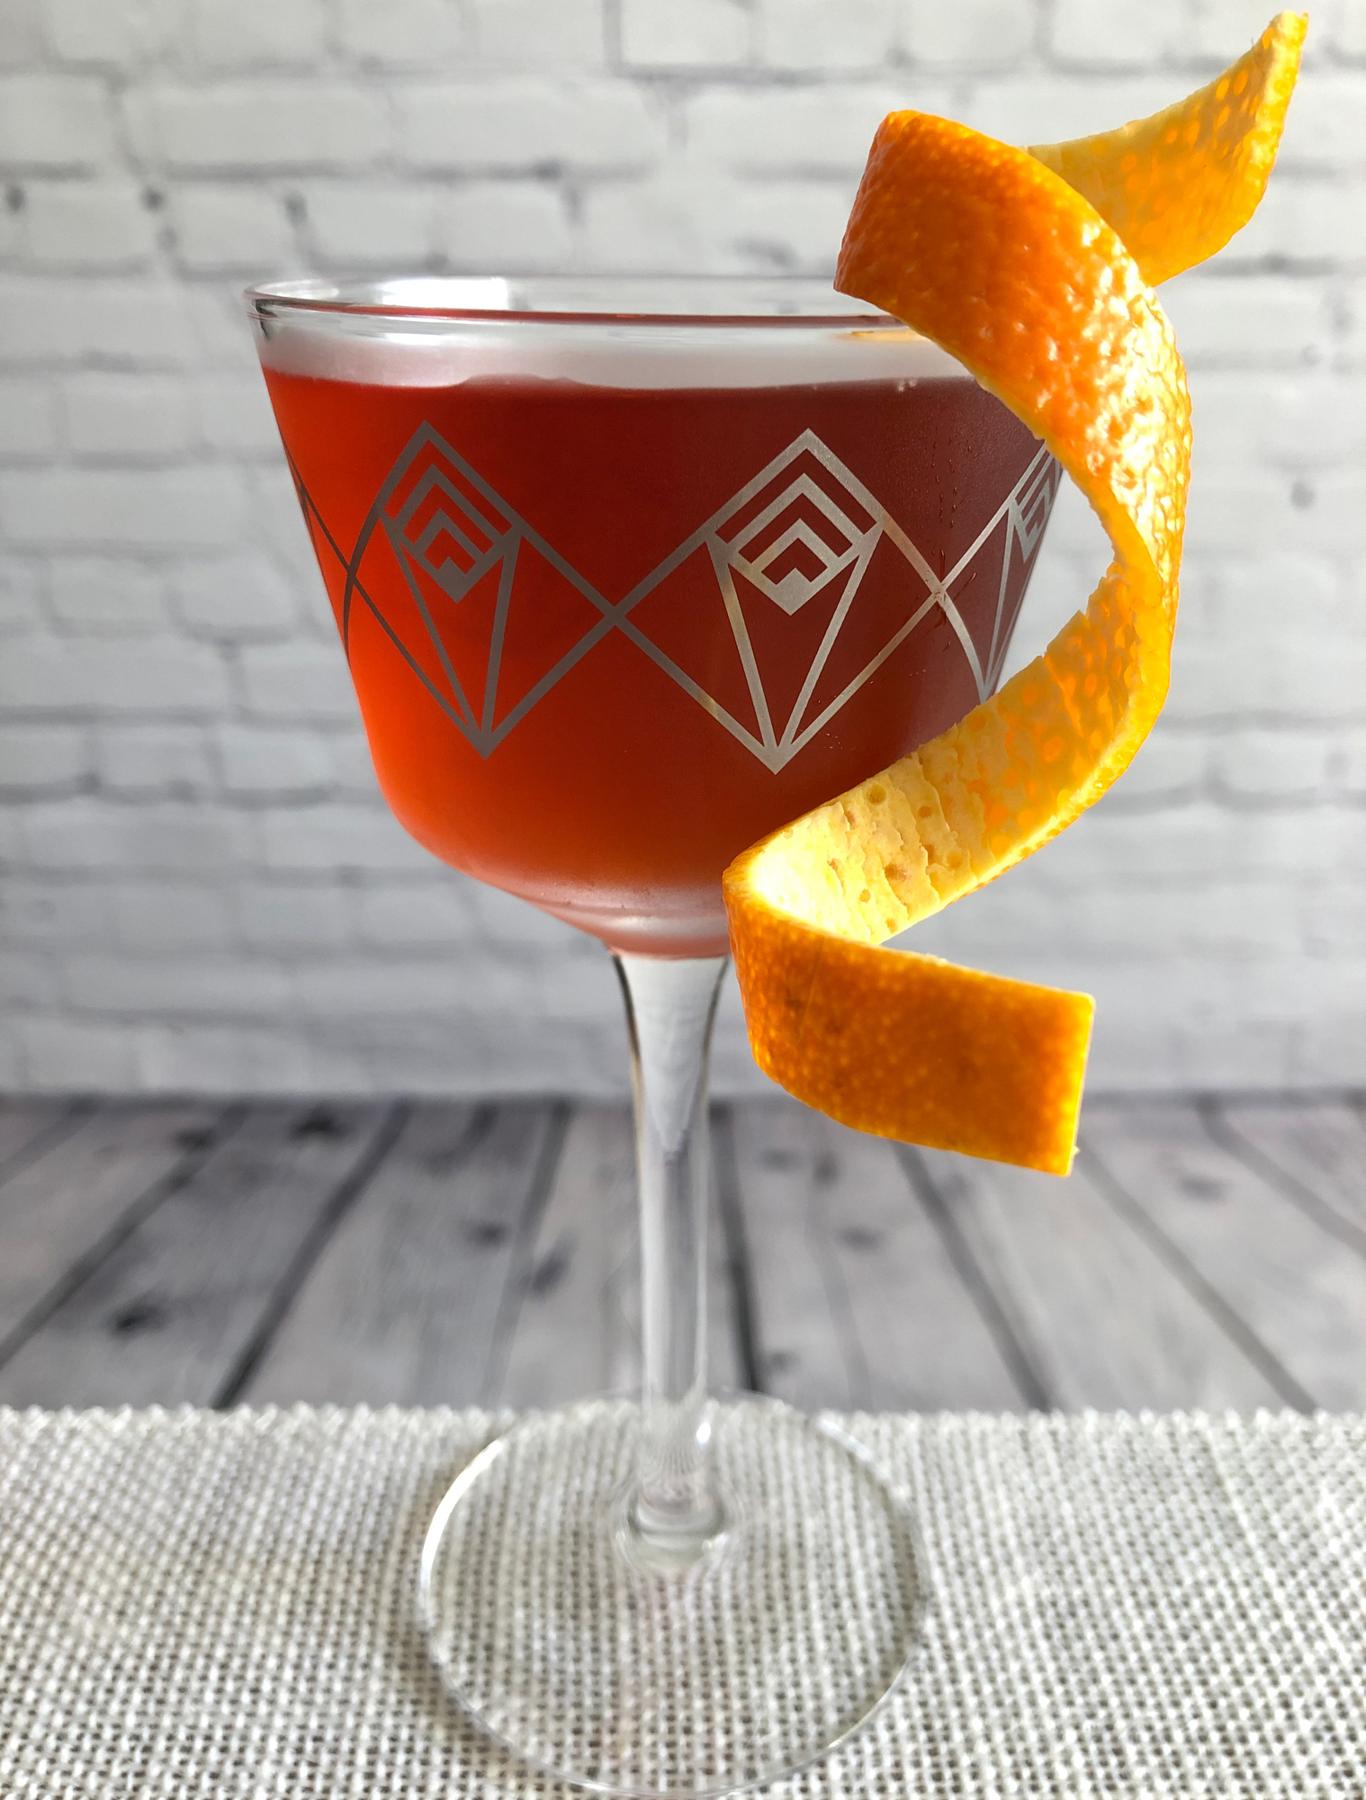 An example of the The Italian Job, the mixed drink (drink), by Joseph Akhavan, Mabel, Paris, featuring Smith & Cross Traditional Jamaica Rum, Cocchi Americano Bianco, Aperitivo Mazzura, Byrrh Grand Quinquina, and orange bitters; photo by Lee Edwards